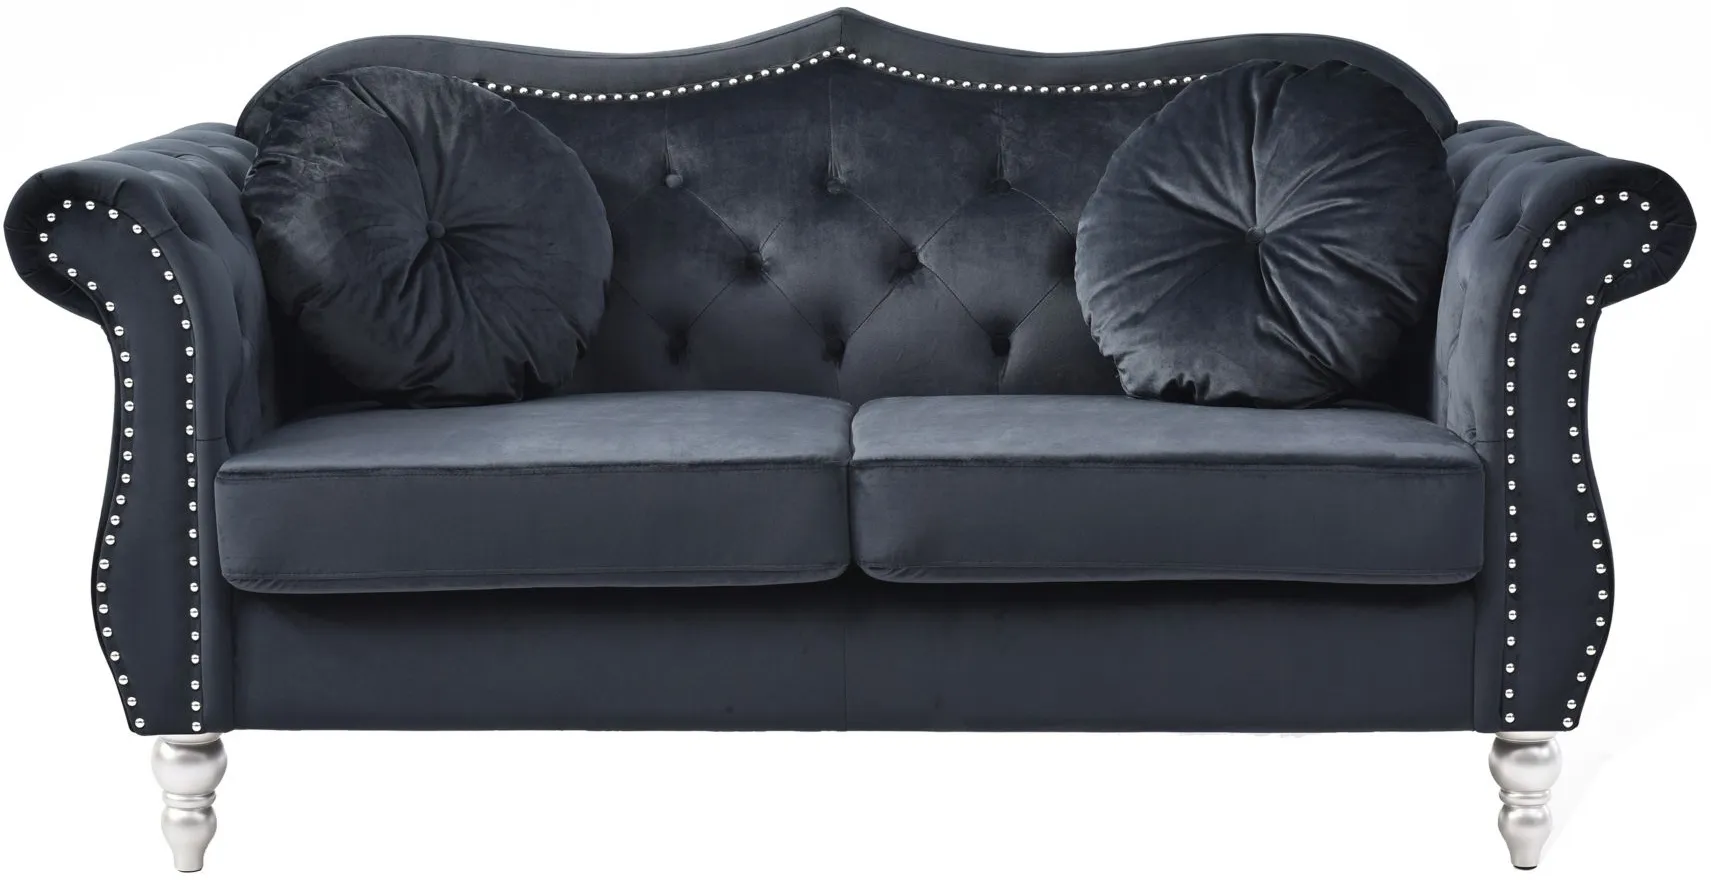 Hollywood Loveseat in Black by Glory Furniture